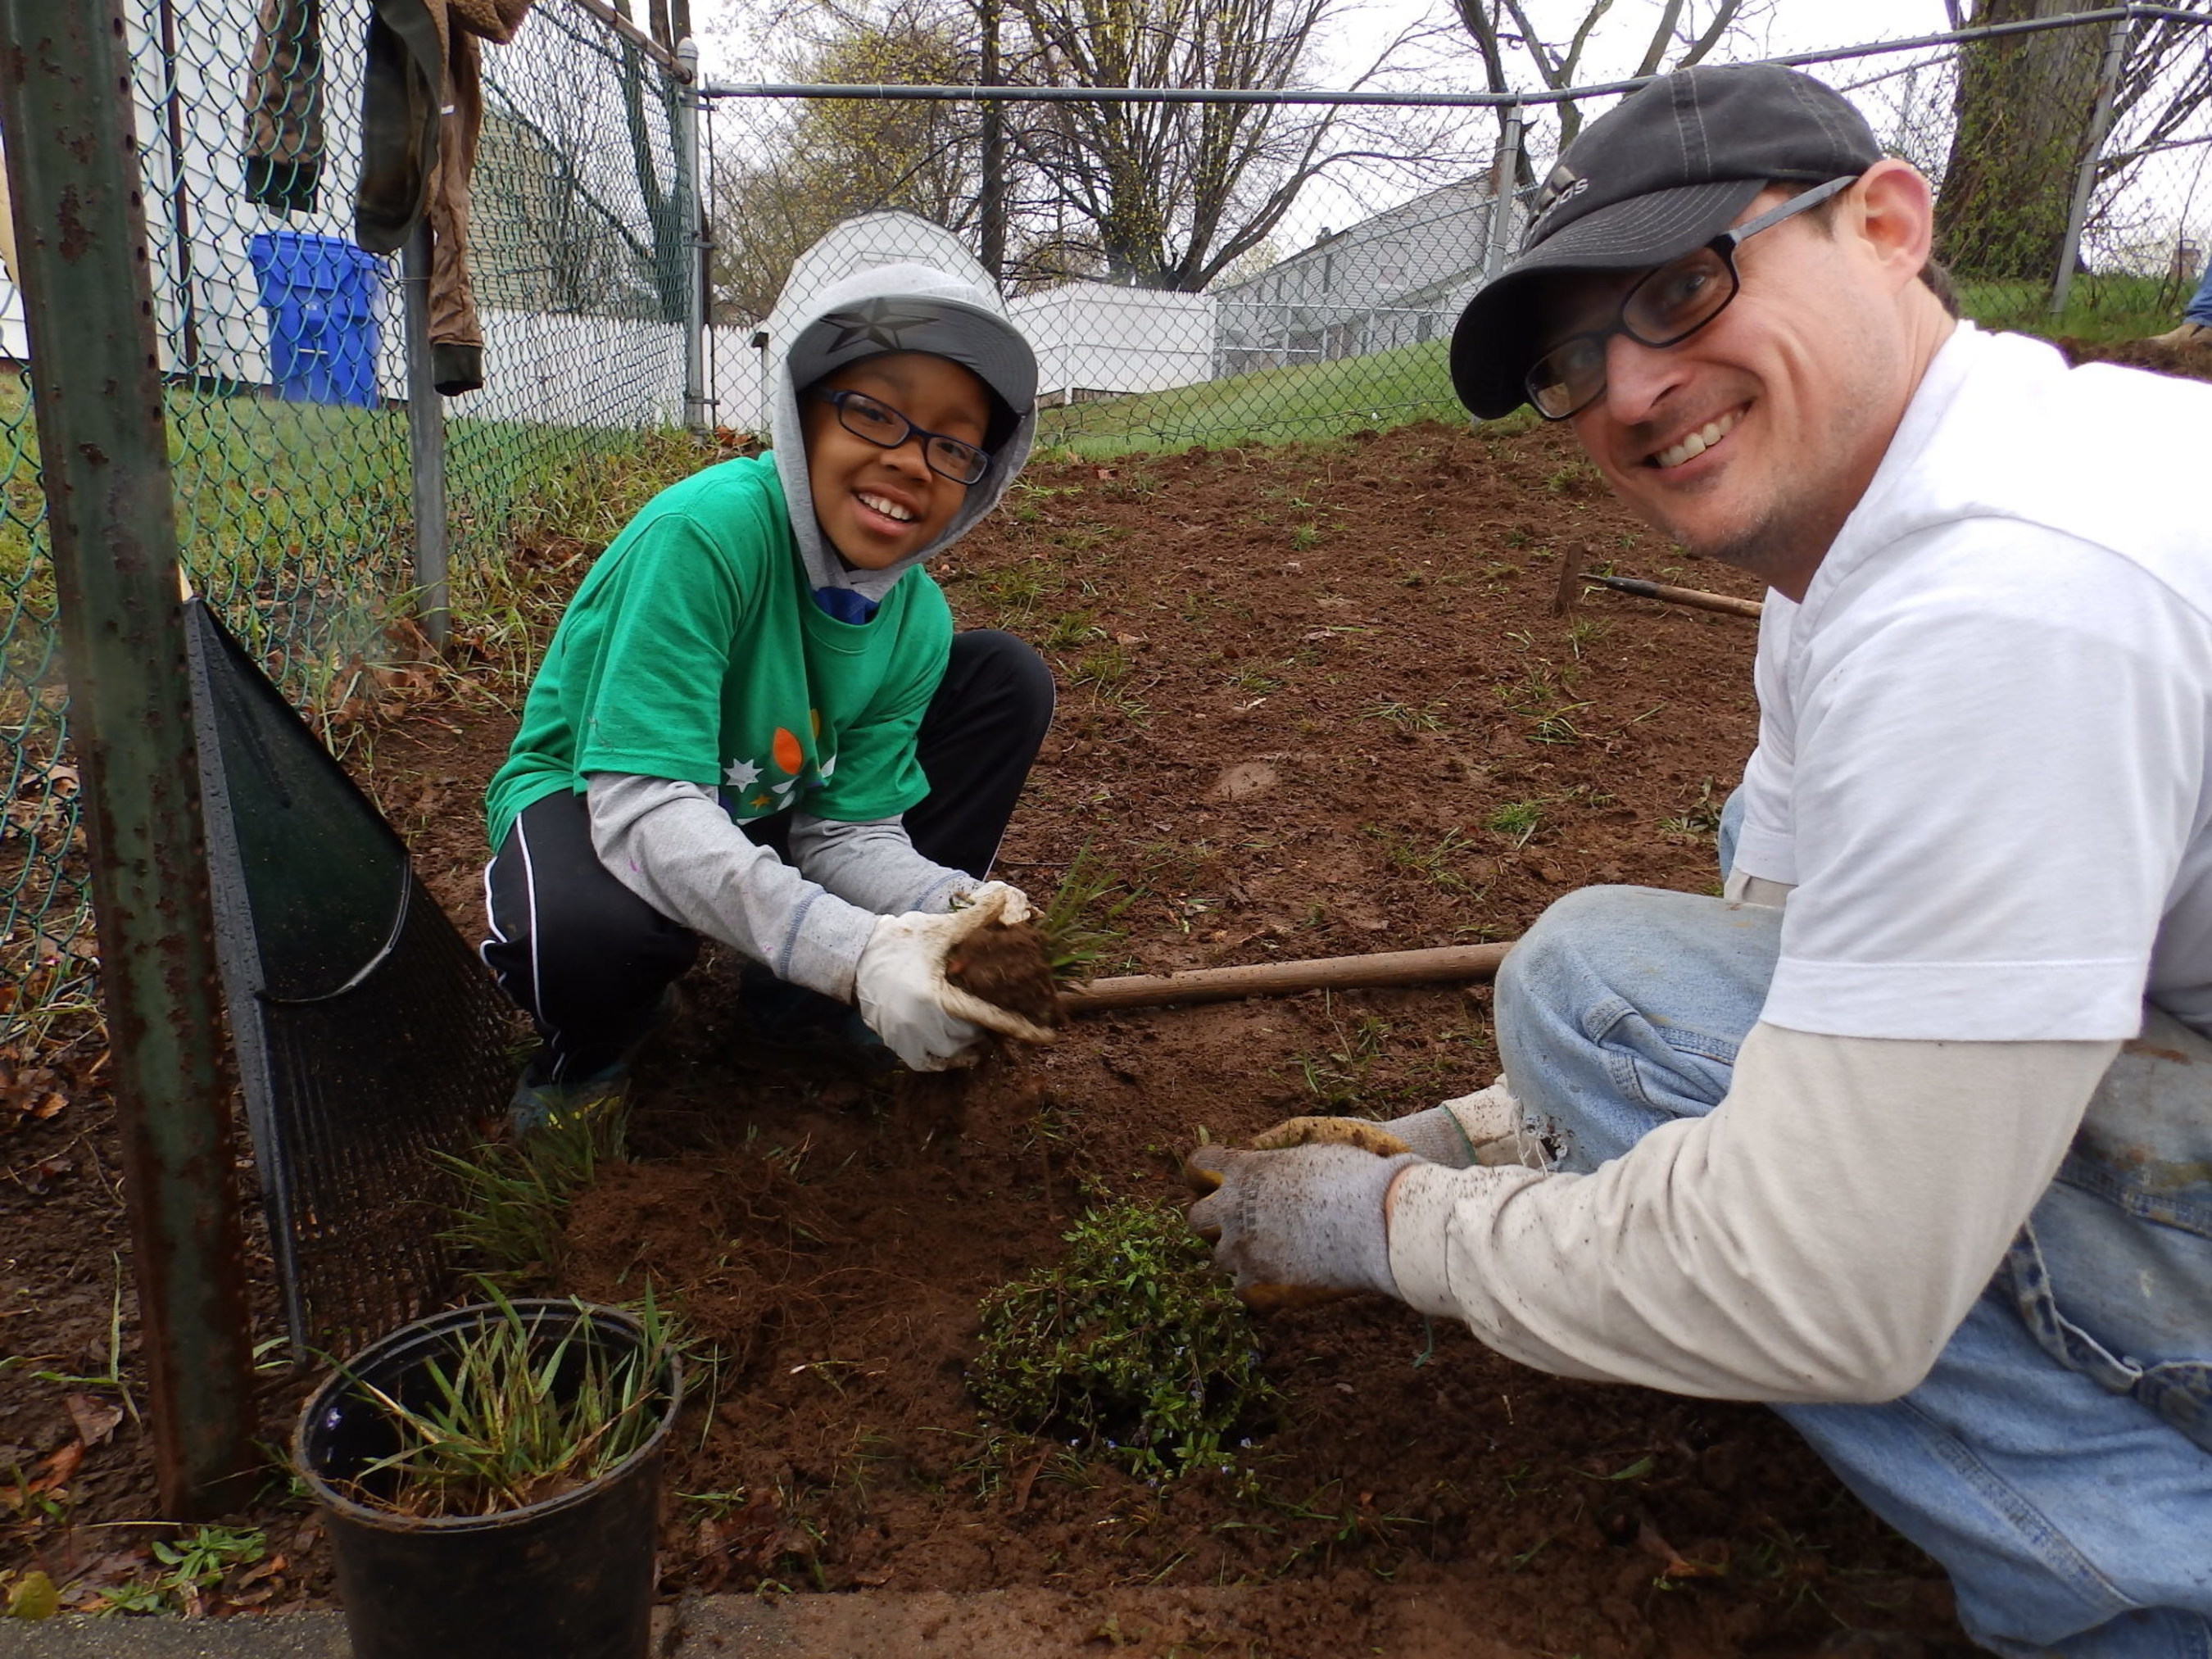 More than 650 local Comcast NBCUniversal employees and their families, friends and community partners will "make change happen" at nine sites throughout Connecticut on April 25th.